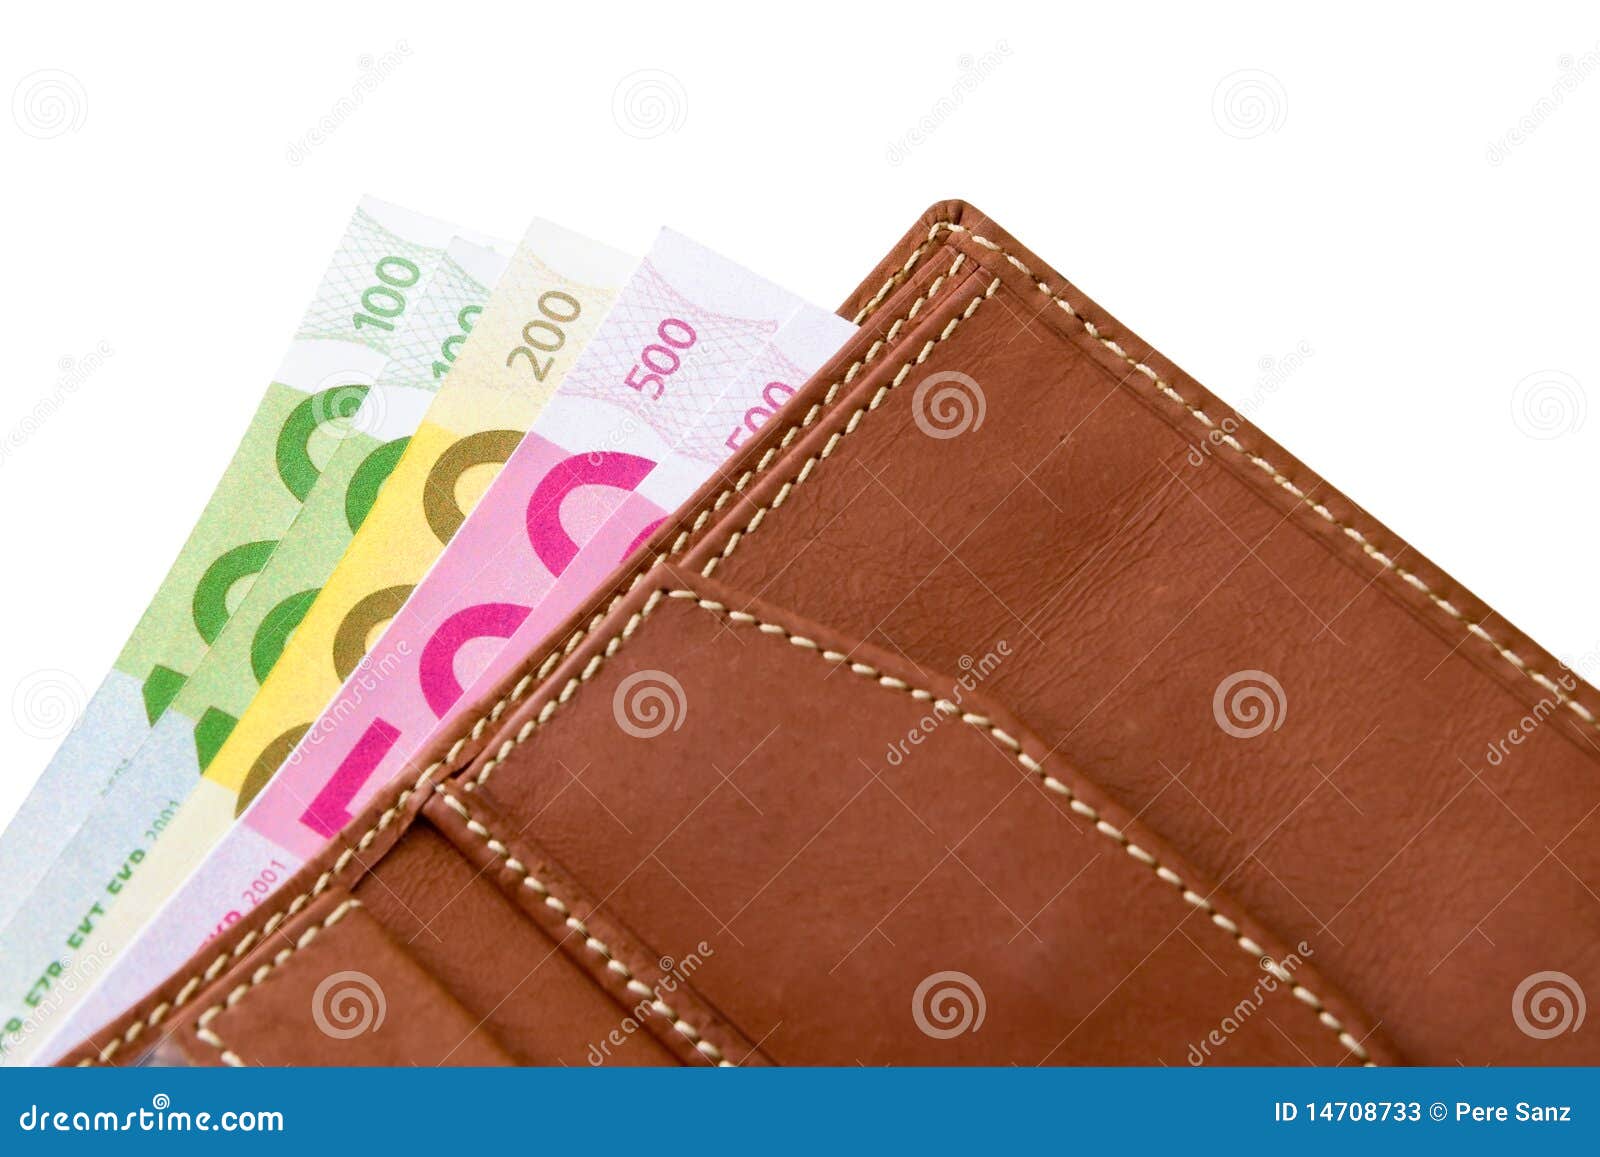 Wallet with euro banknotes stock image. Image of currency - 14708733